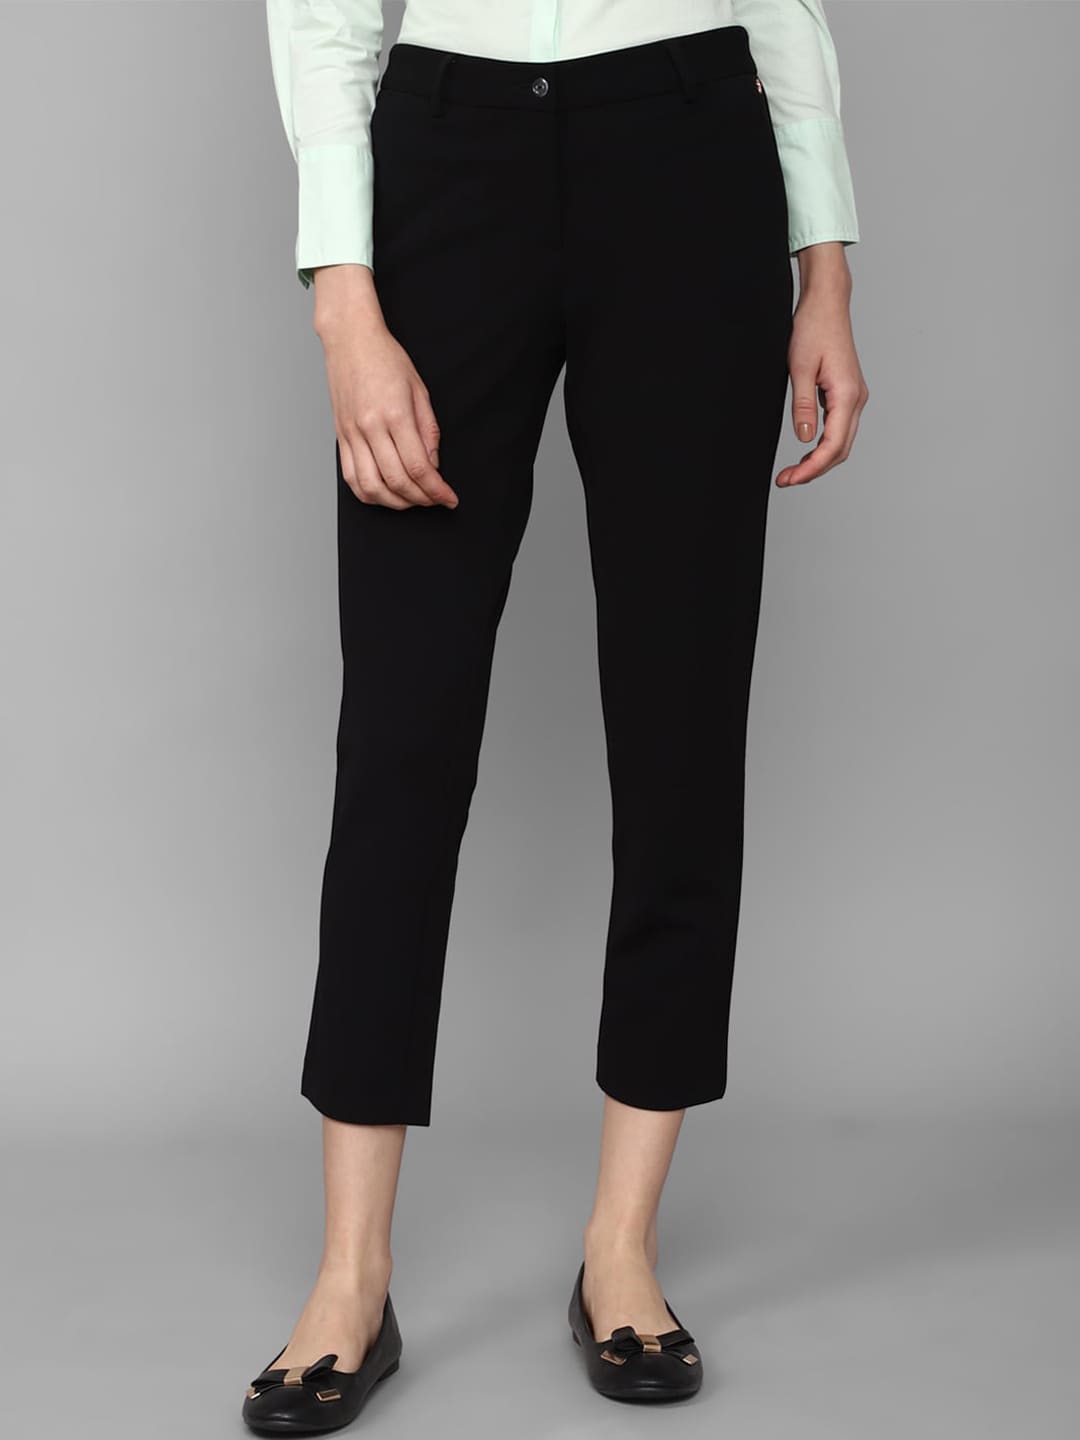 Allen Solly Woman Mid-Rise Formal Trousers Price in India